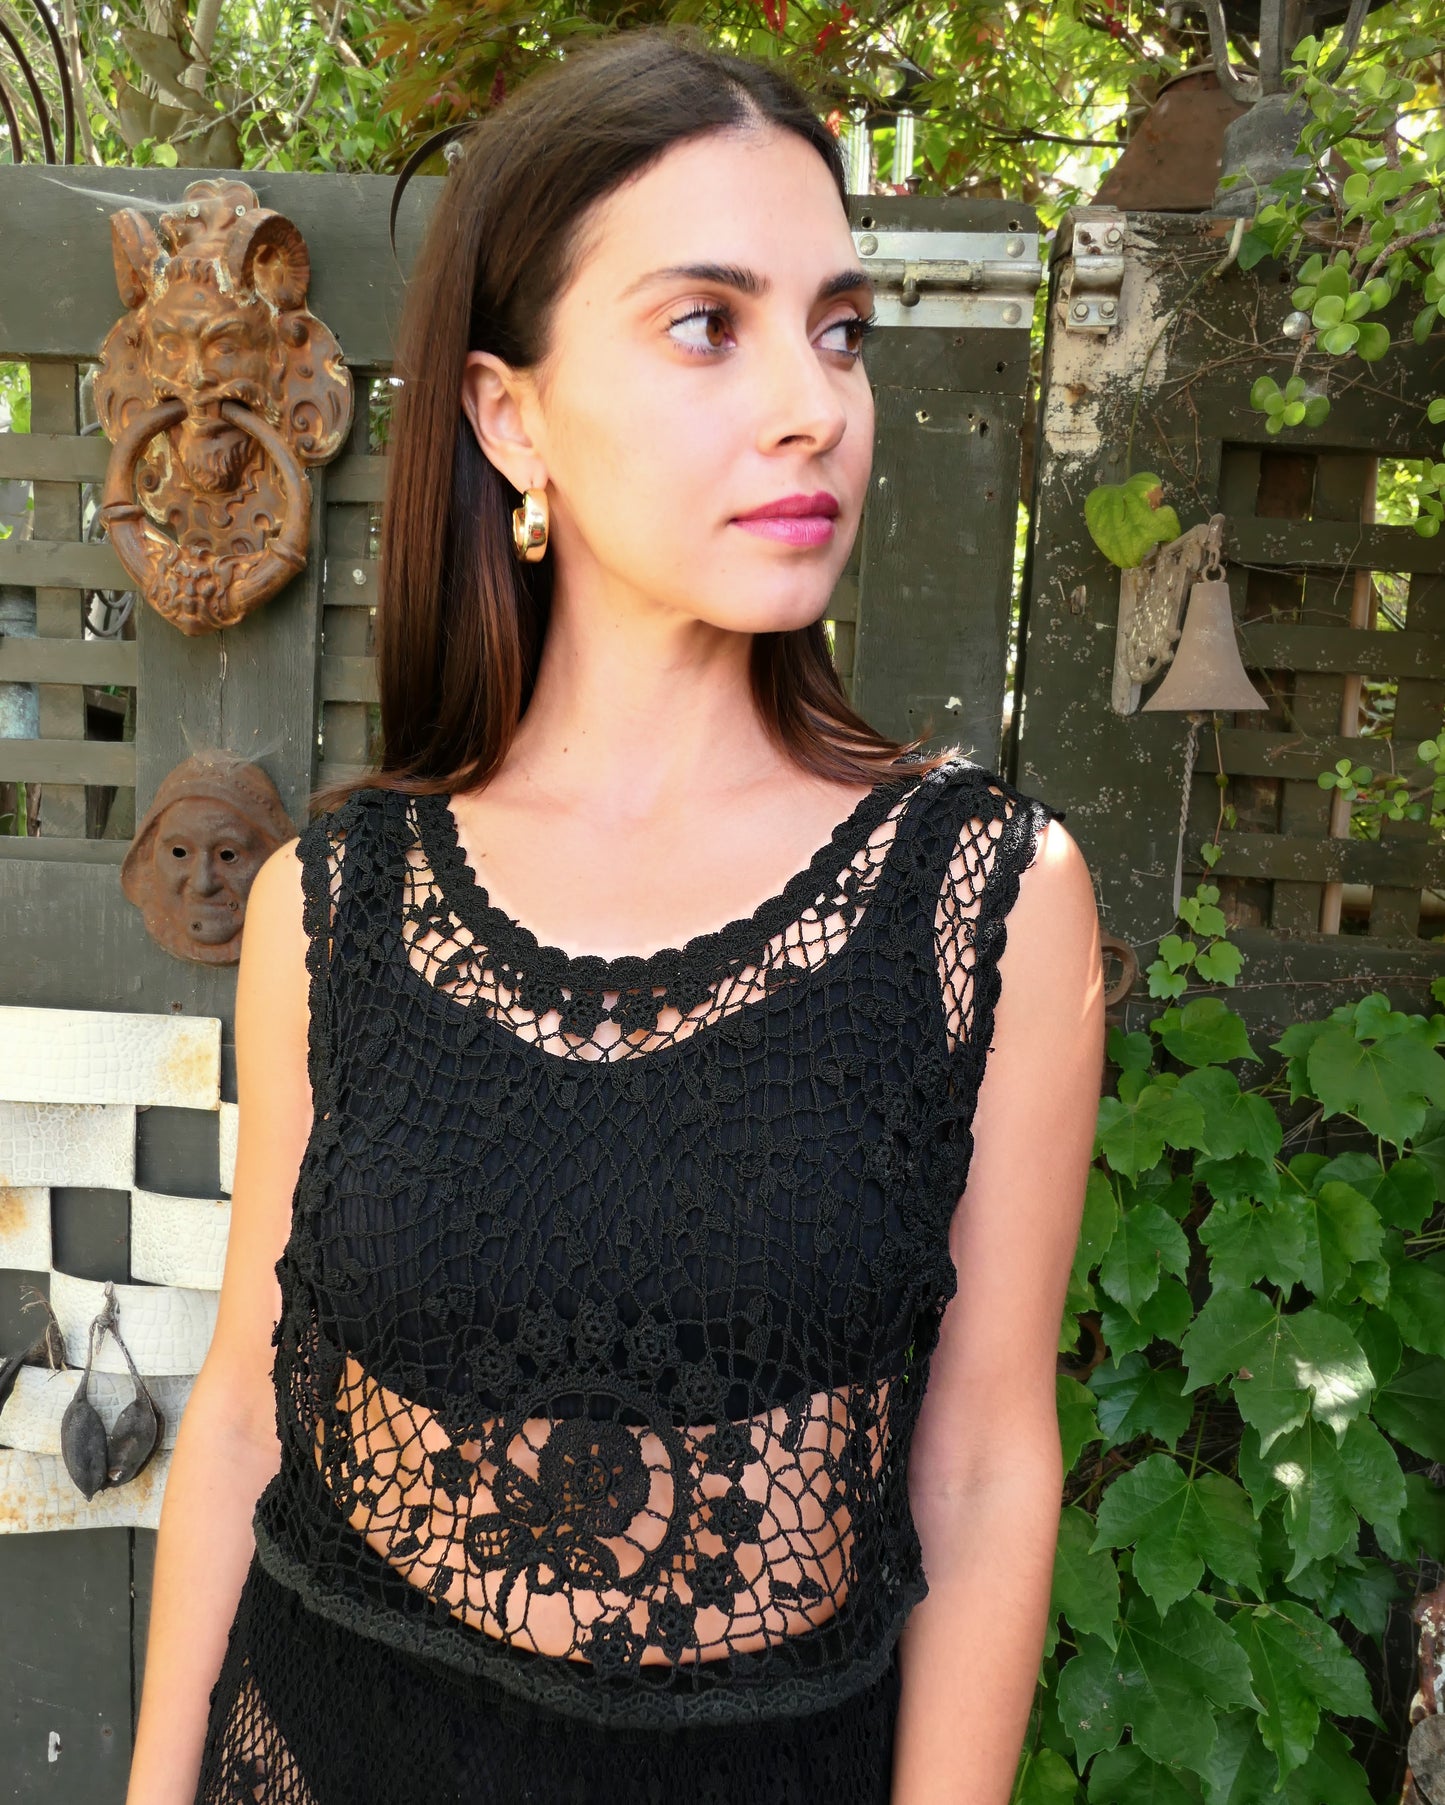 A Lim's Vintage hand crocheted sleeveless black tank top with a beautiful floral themed design motif. Both casual and elegant, with a timeless vintage feel, this versatile top can be worn over a simple black slip or bikini top and paired with just about anything. Color: Black, Size: Small to Medium